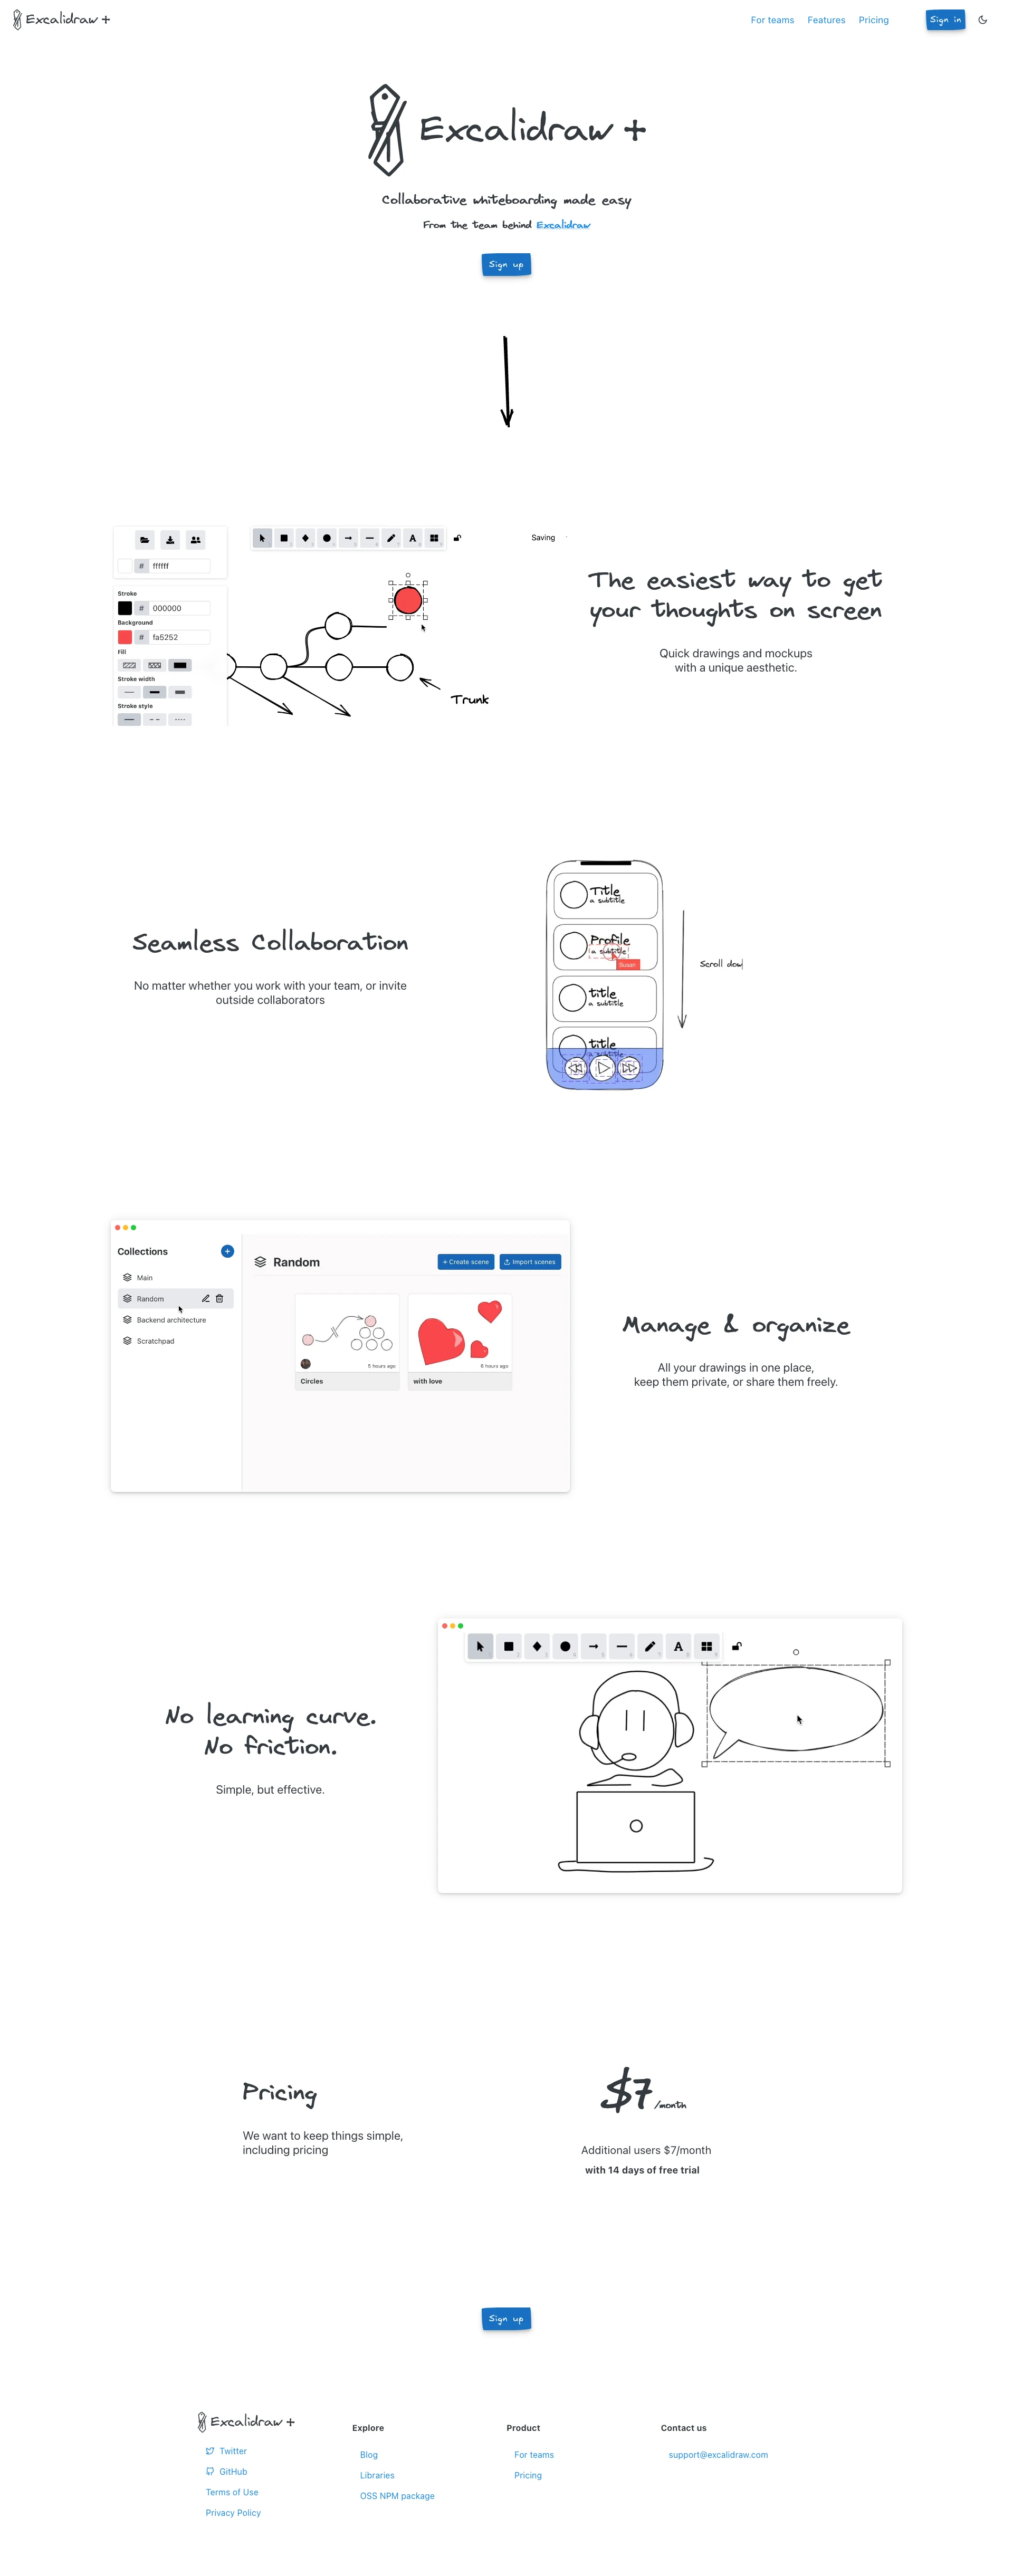 Excalidraw+ Landing Page Example: Whiteboarding tool with hand drawn like experience. Ideal for conducting interviews, drawing diagrams, prototypes or sketches and much more!